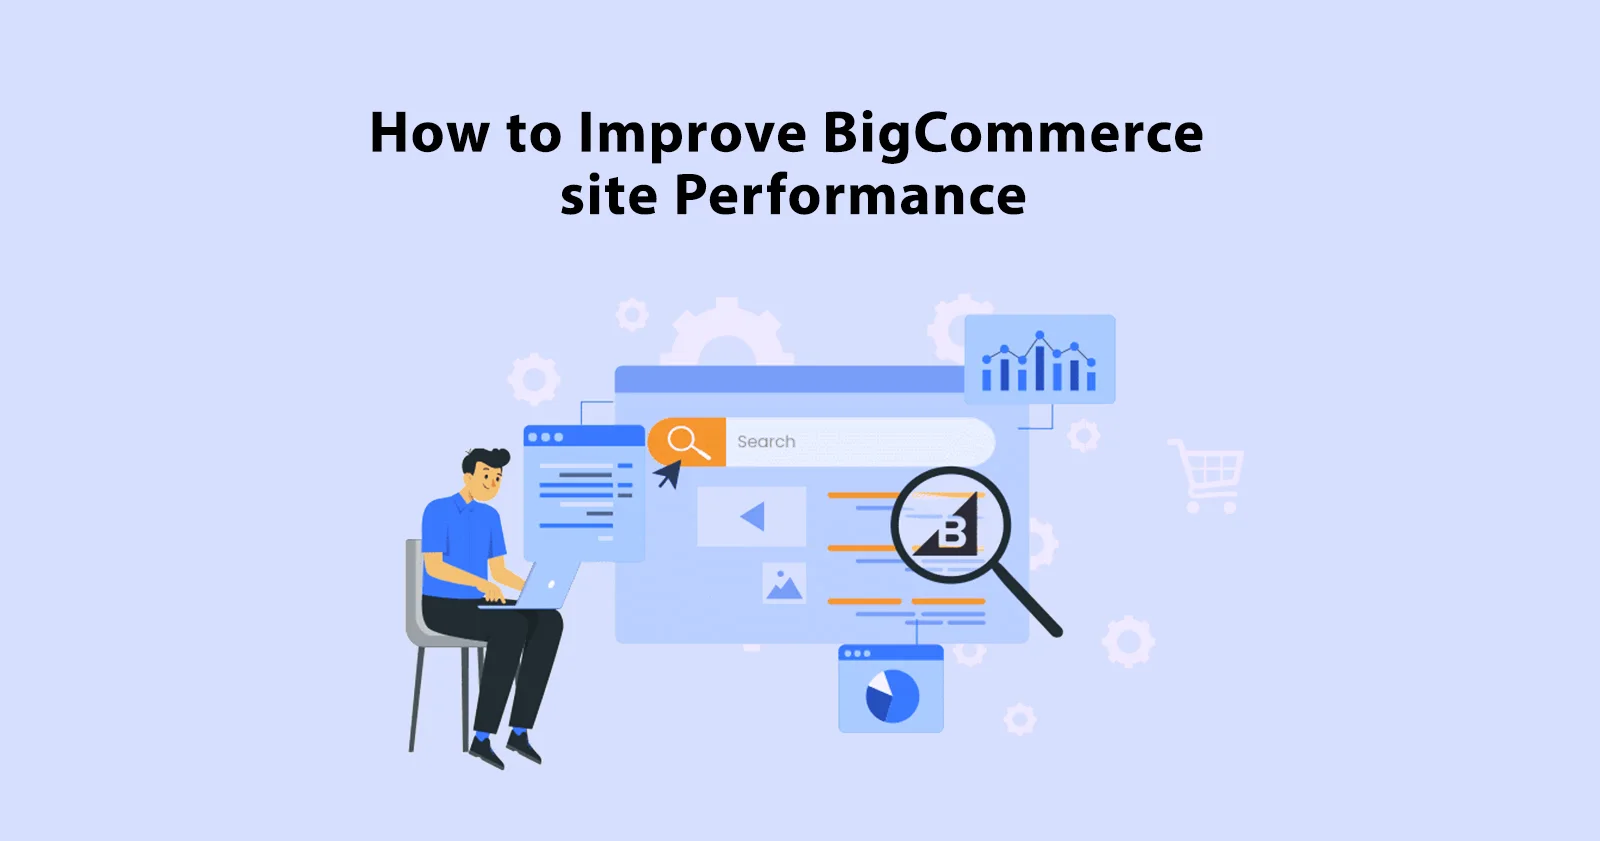 How to Improve BigCommerce Site Performance